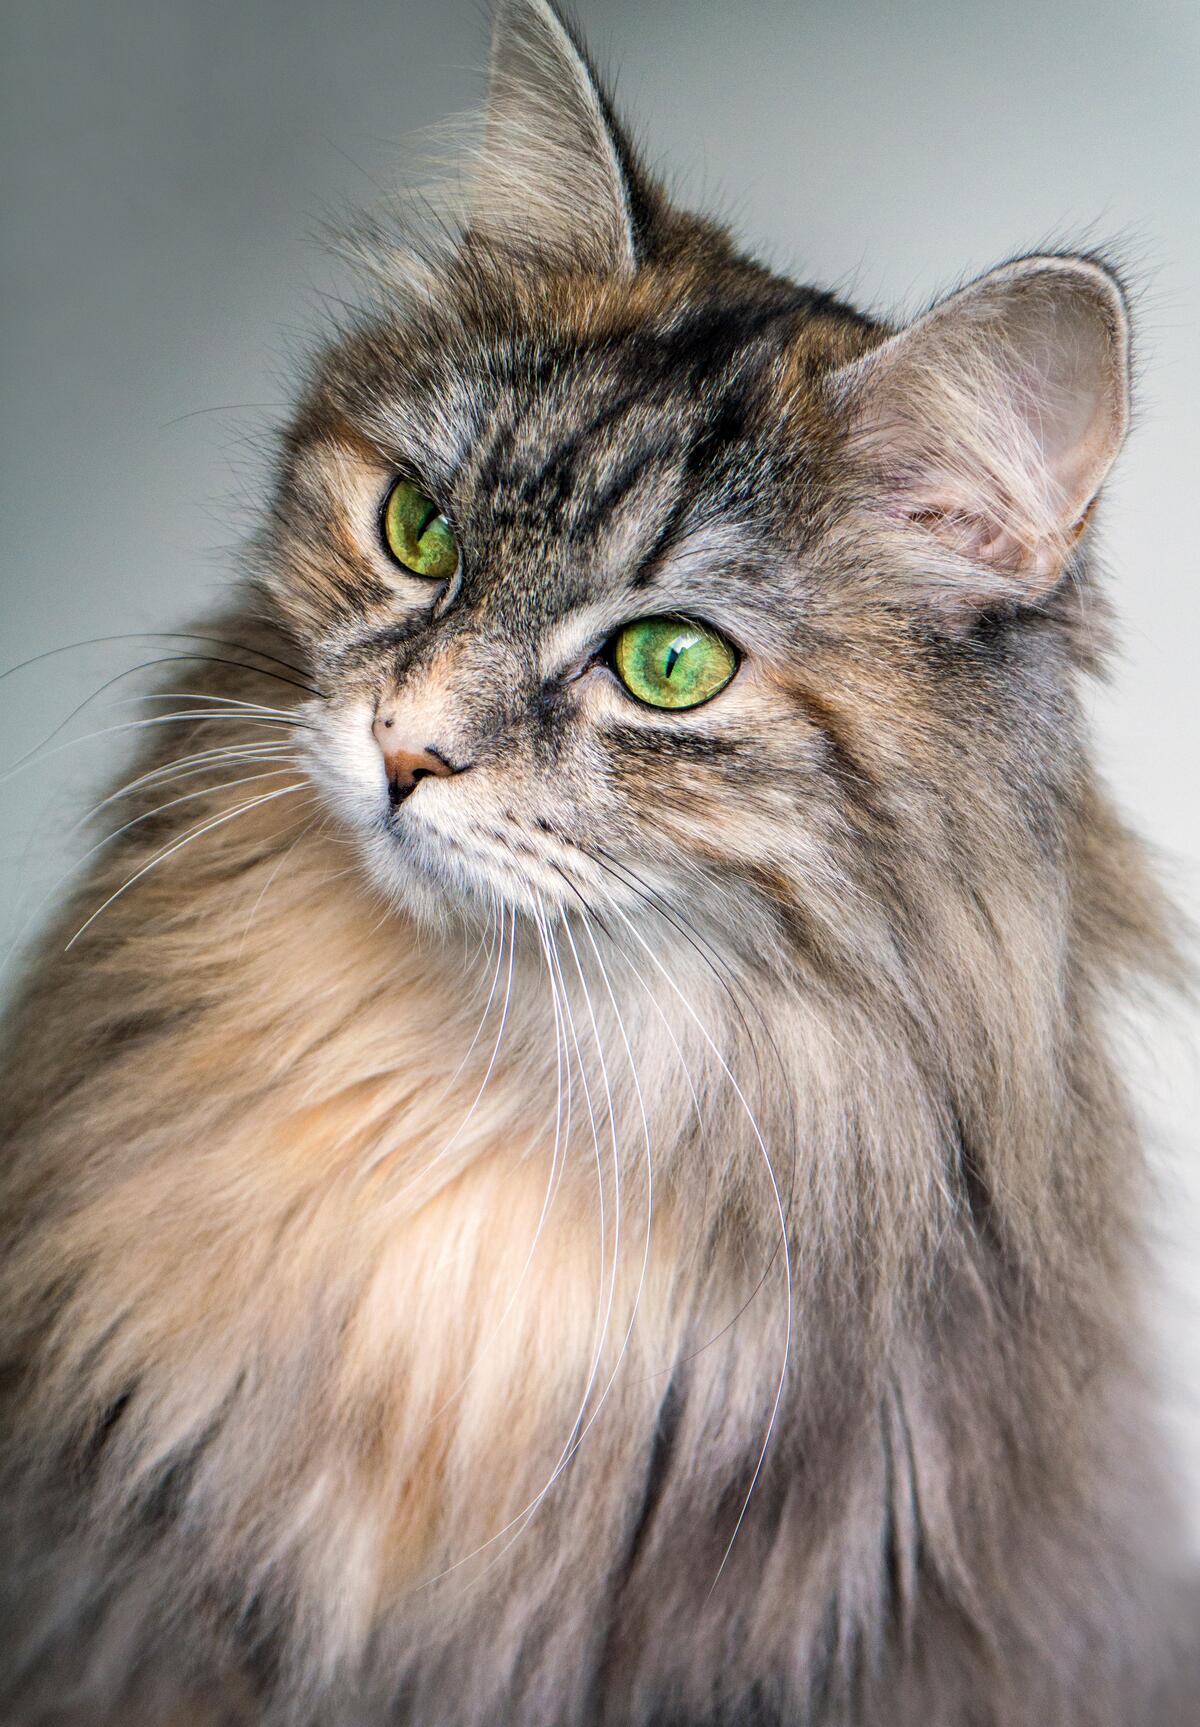 A fluffy cat with green eyes